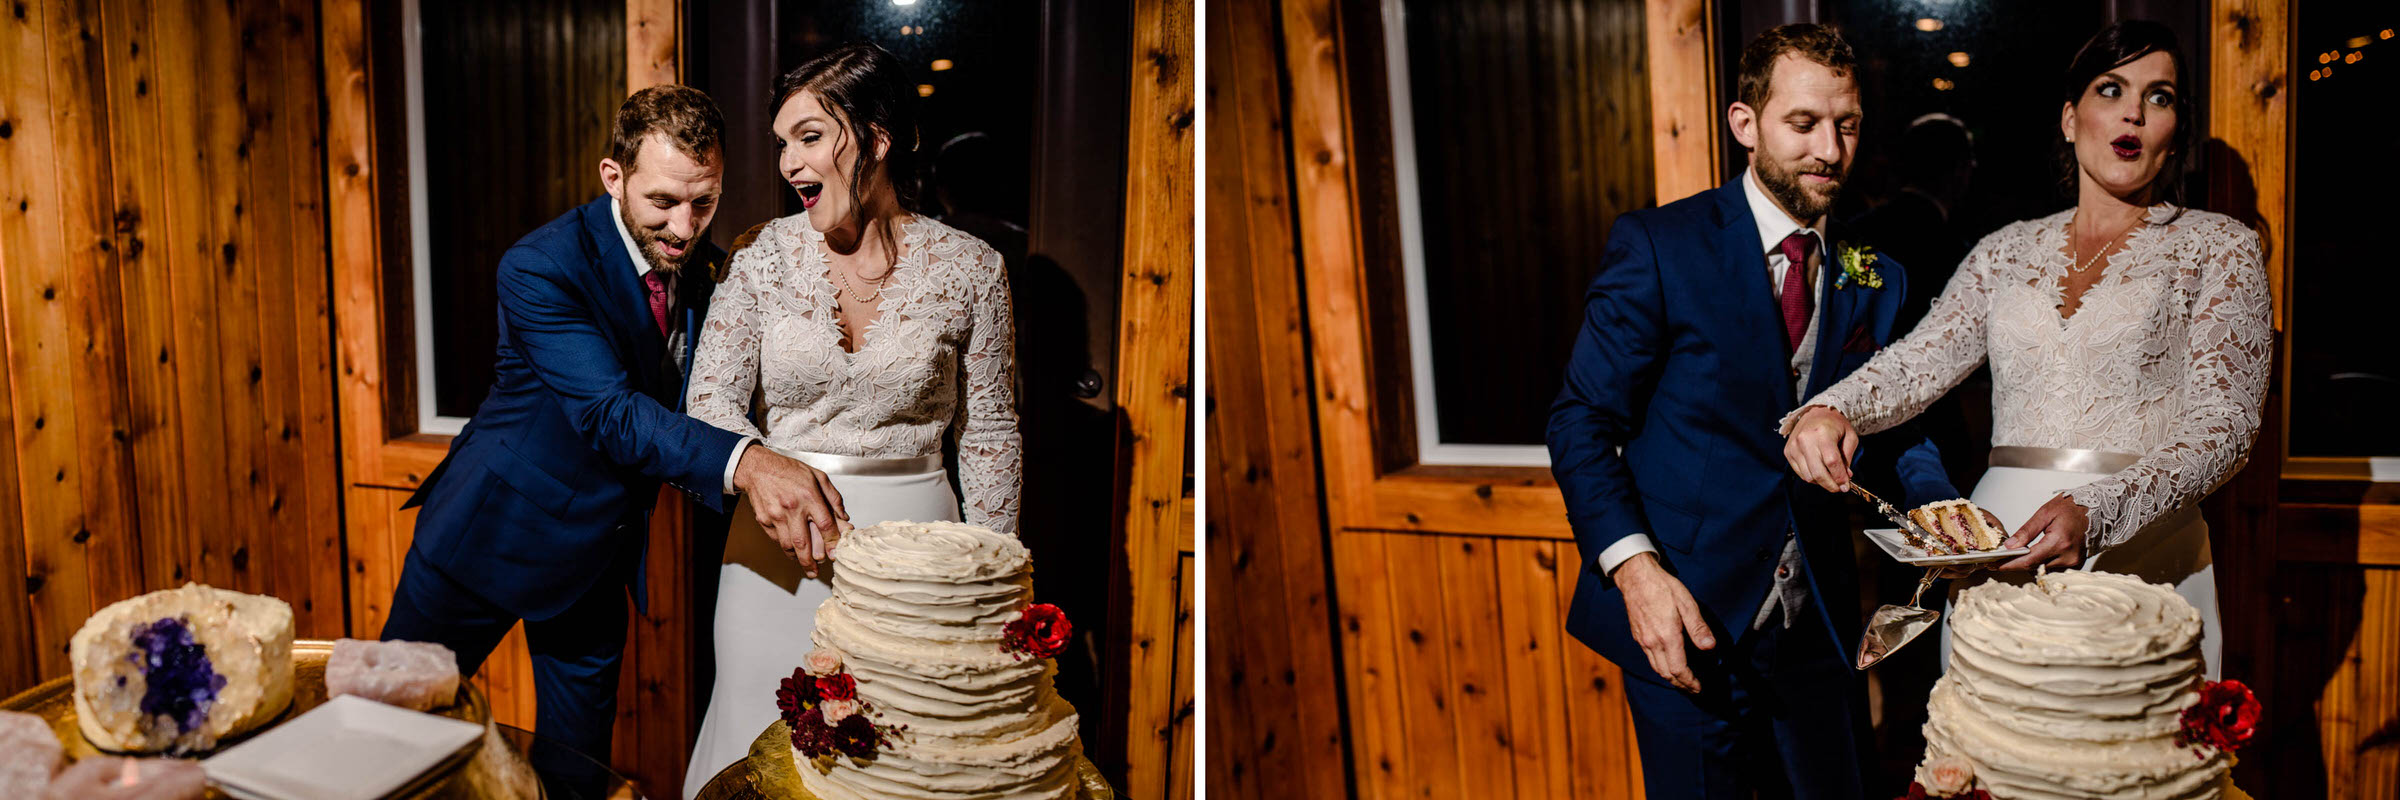 Romantic Whidbey Island weddings: Andrea and Rod (12)